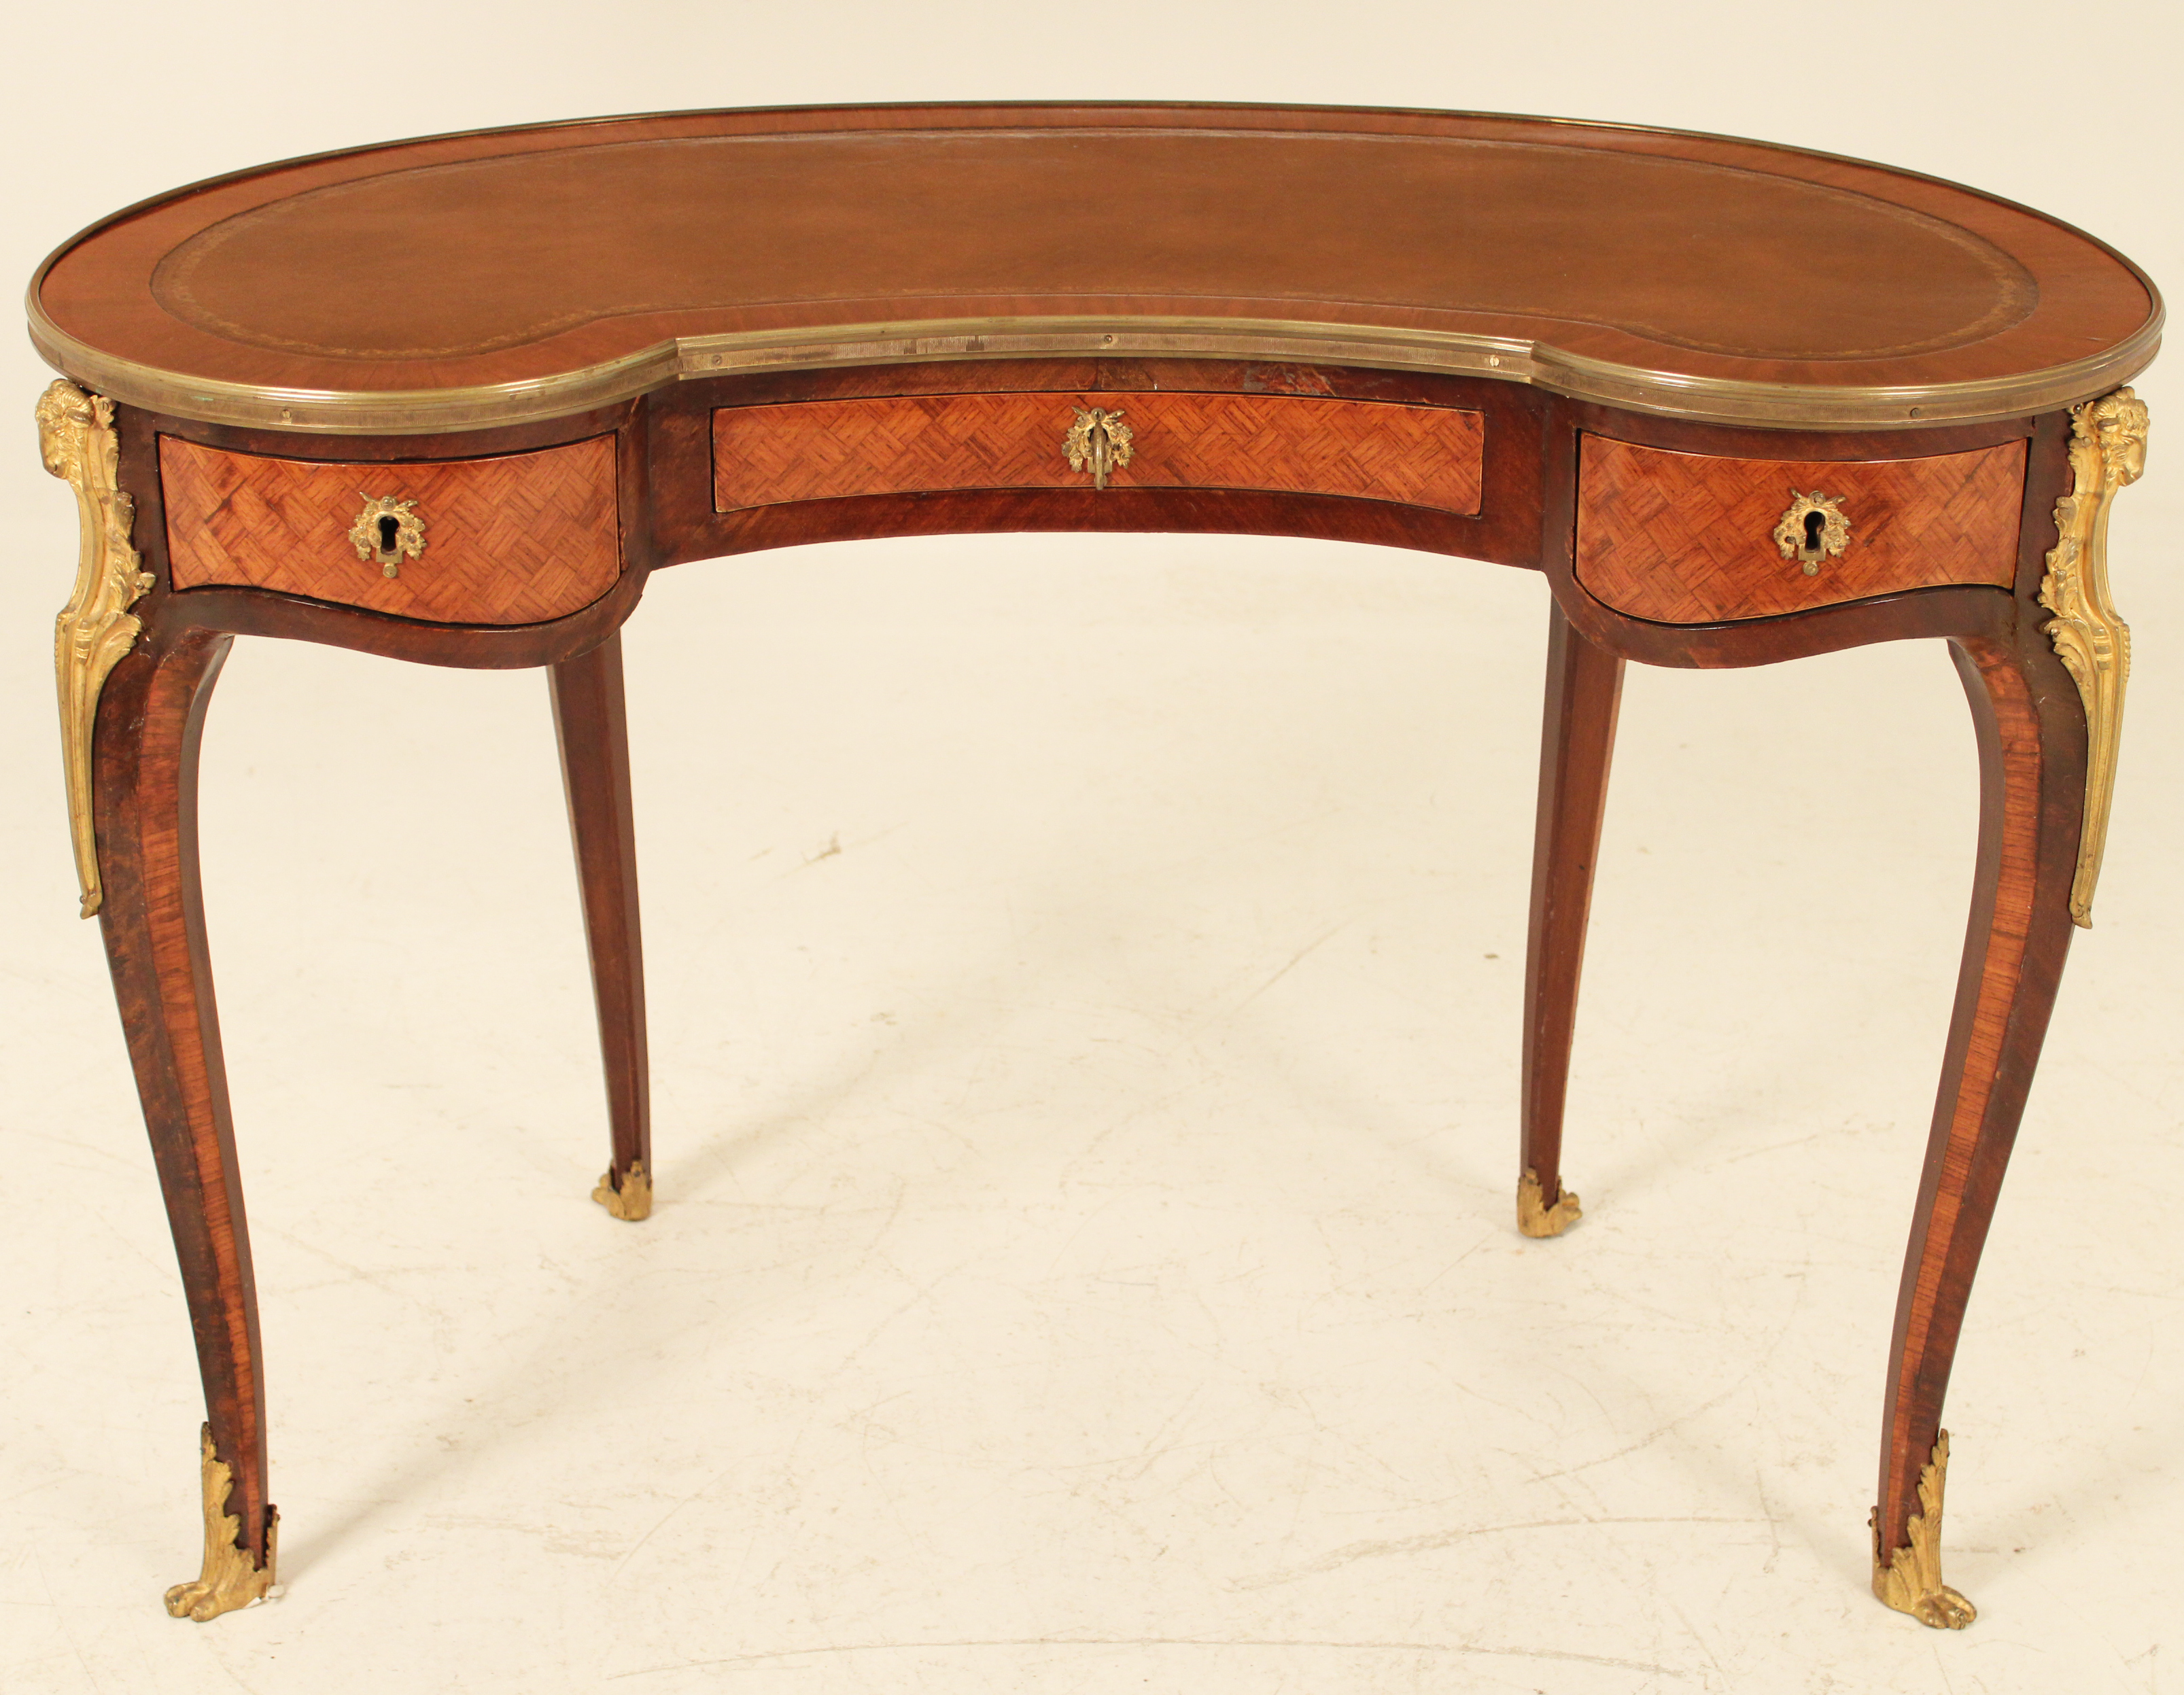 LOUIS XV STYLE KIDNEY SHAPED INLAID